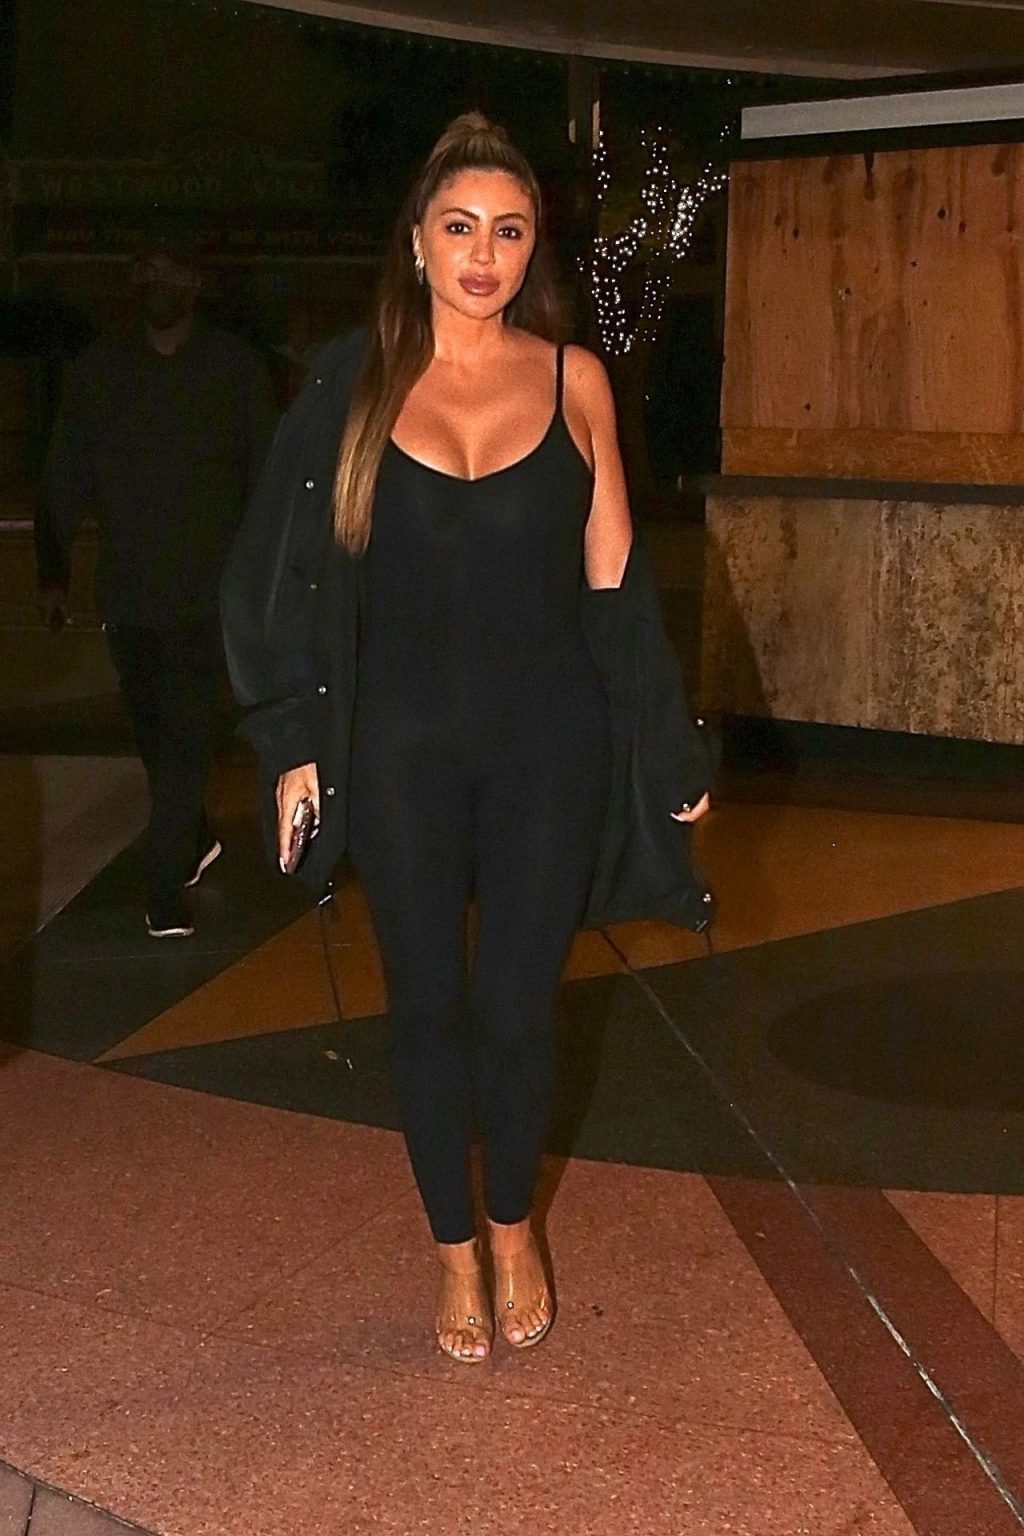 Larsa Pippen Makes Her First Appearance Out in LA (10 Photos)